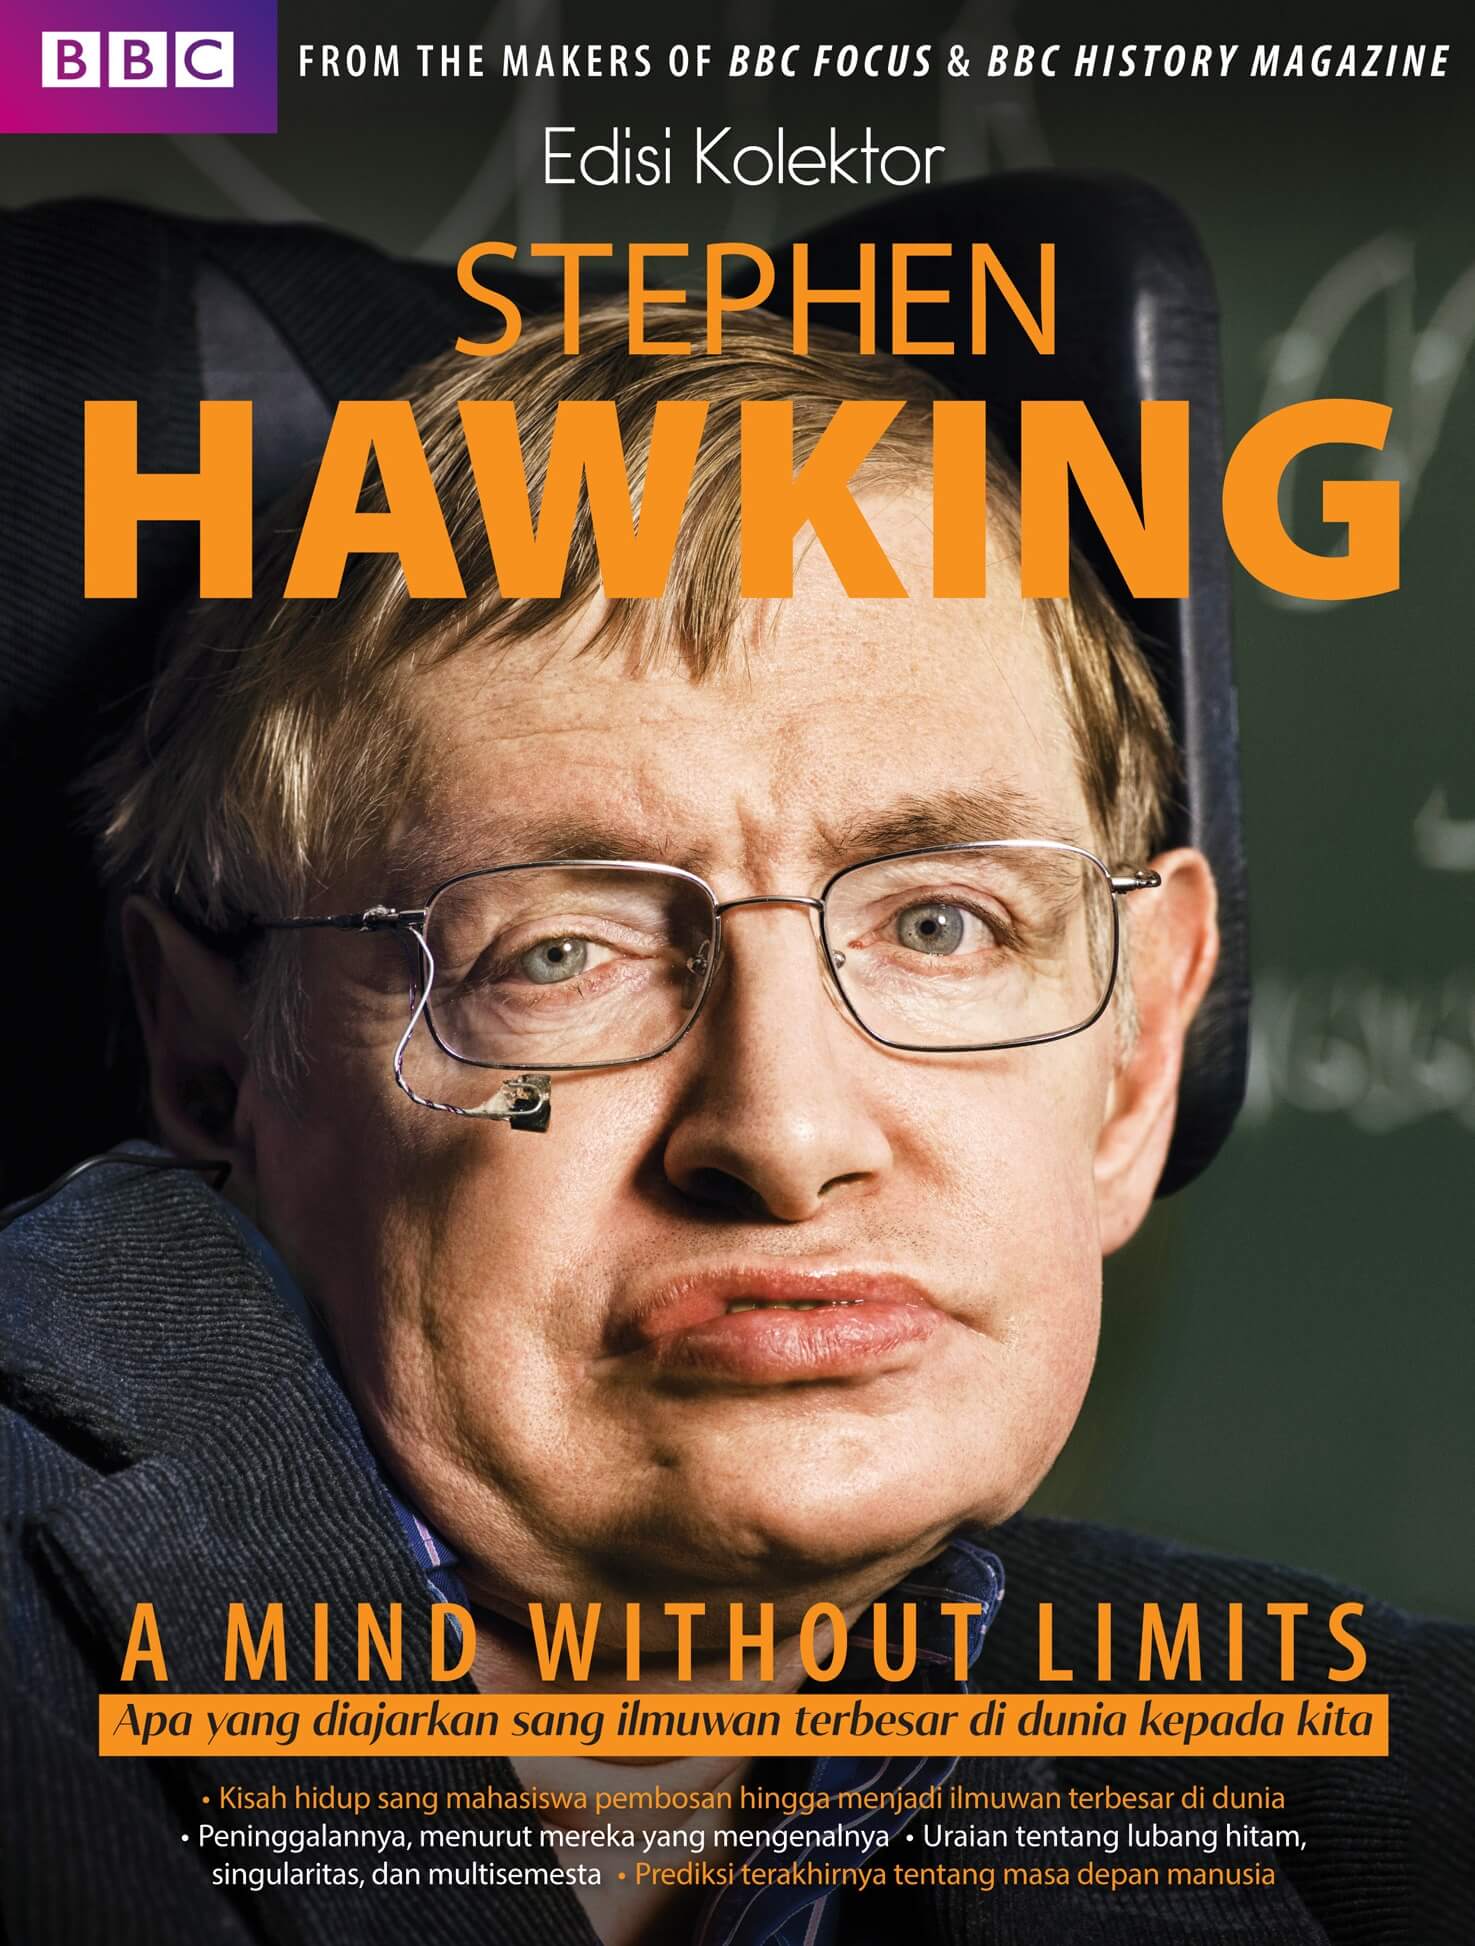 STEPHEN HAWKING: A MIND WITHOUT LIMITS